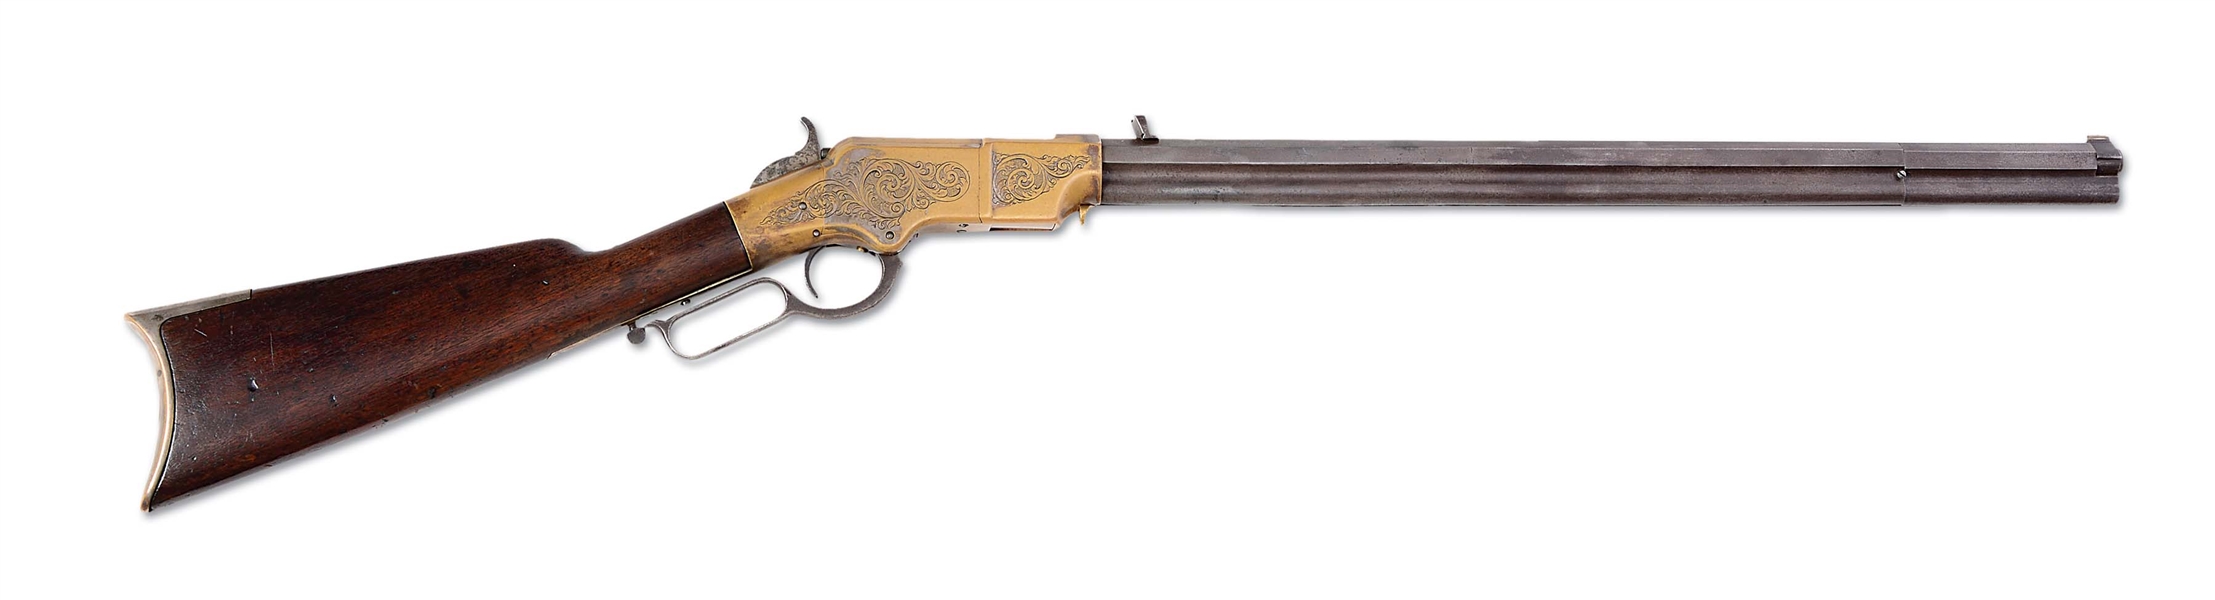 (A) ENGRAVED 2ND MODEL HENRY RIFLE (1864).